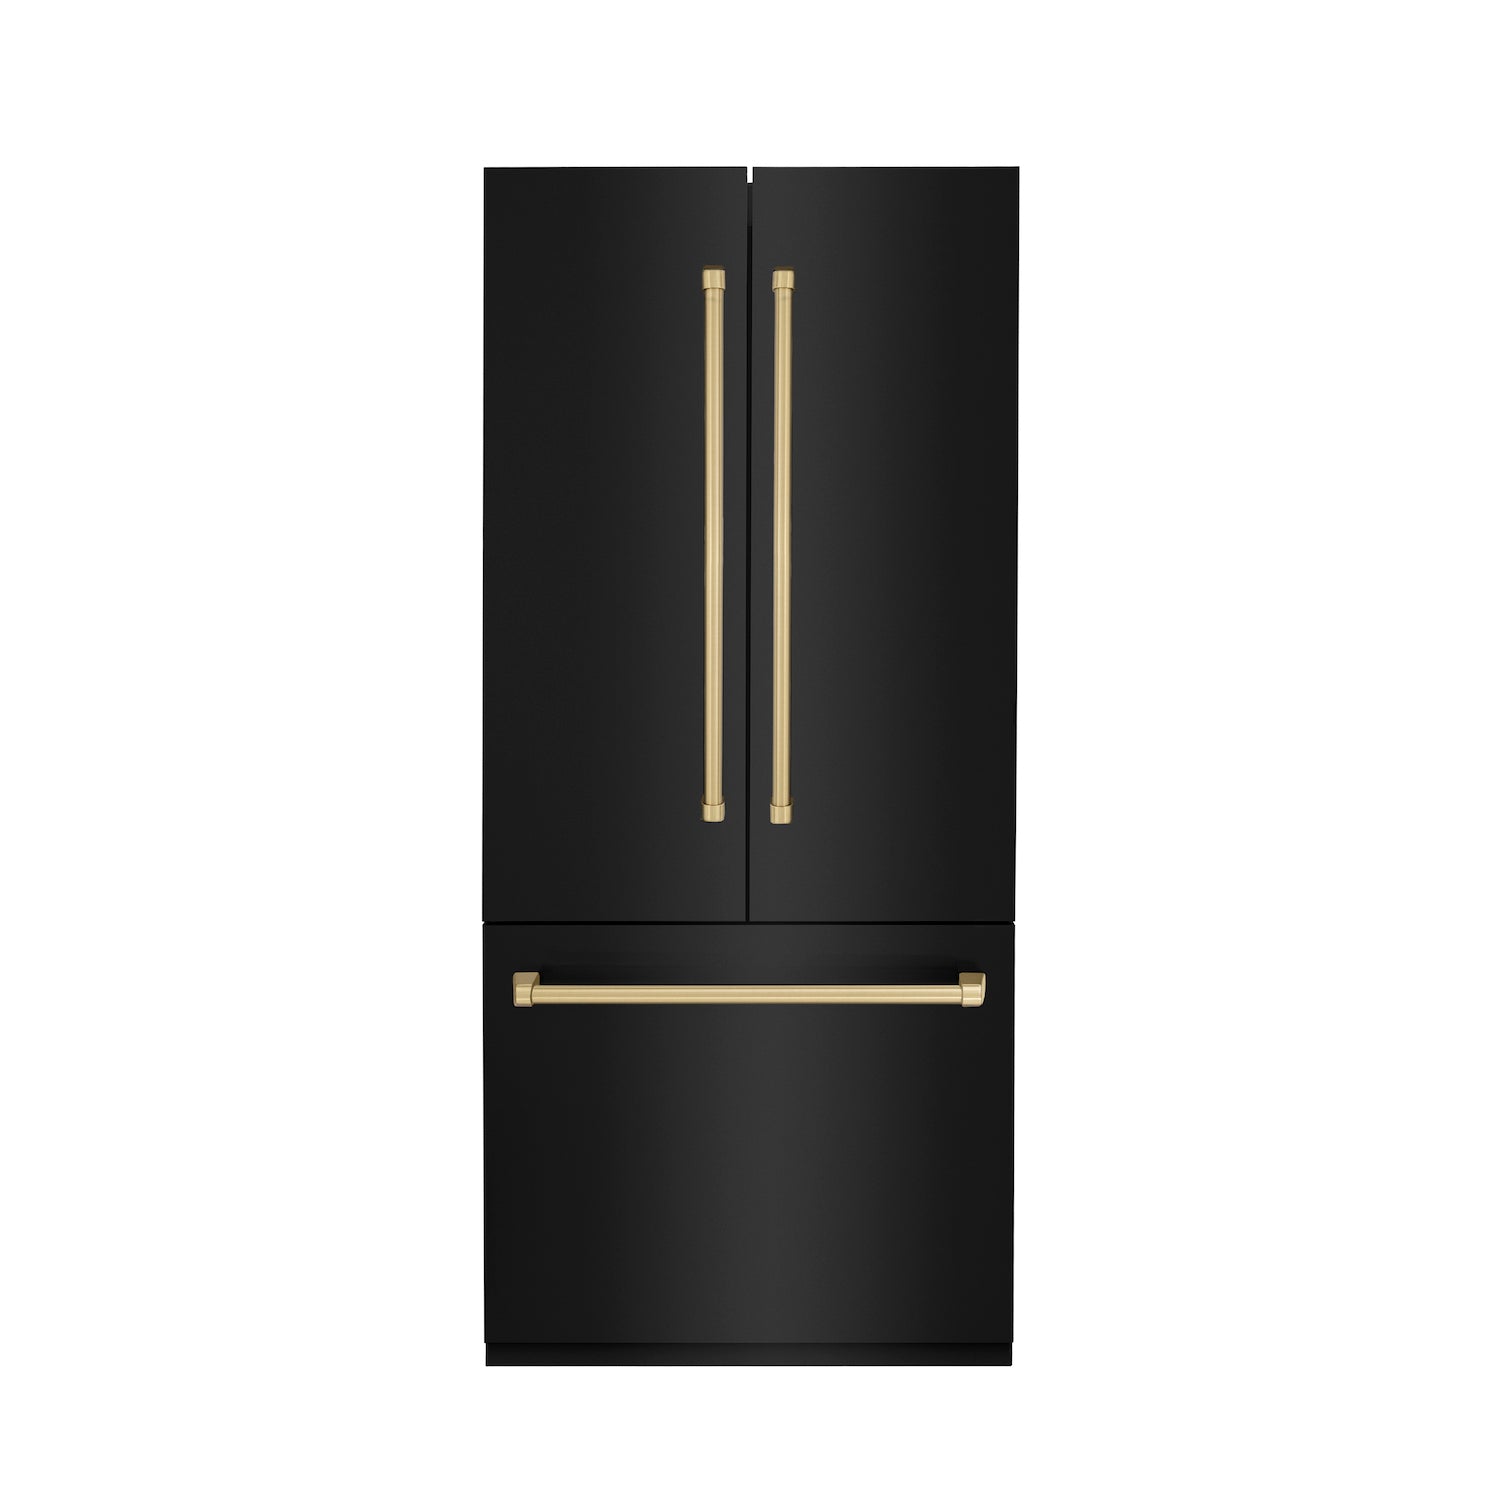 ZLINE 36" Autograph Edition Built-in 2-Door Bottom Freezer Refrigerator - Black Stainless Steel with Champagne Bronze Accents, Internal Water and Ice Dispenser